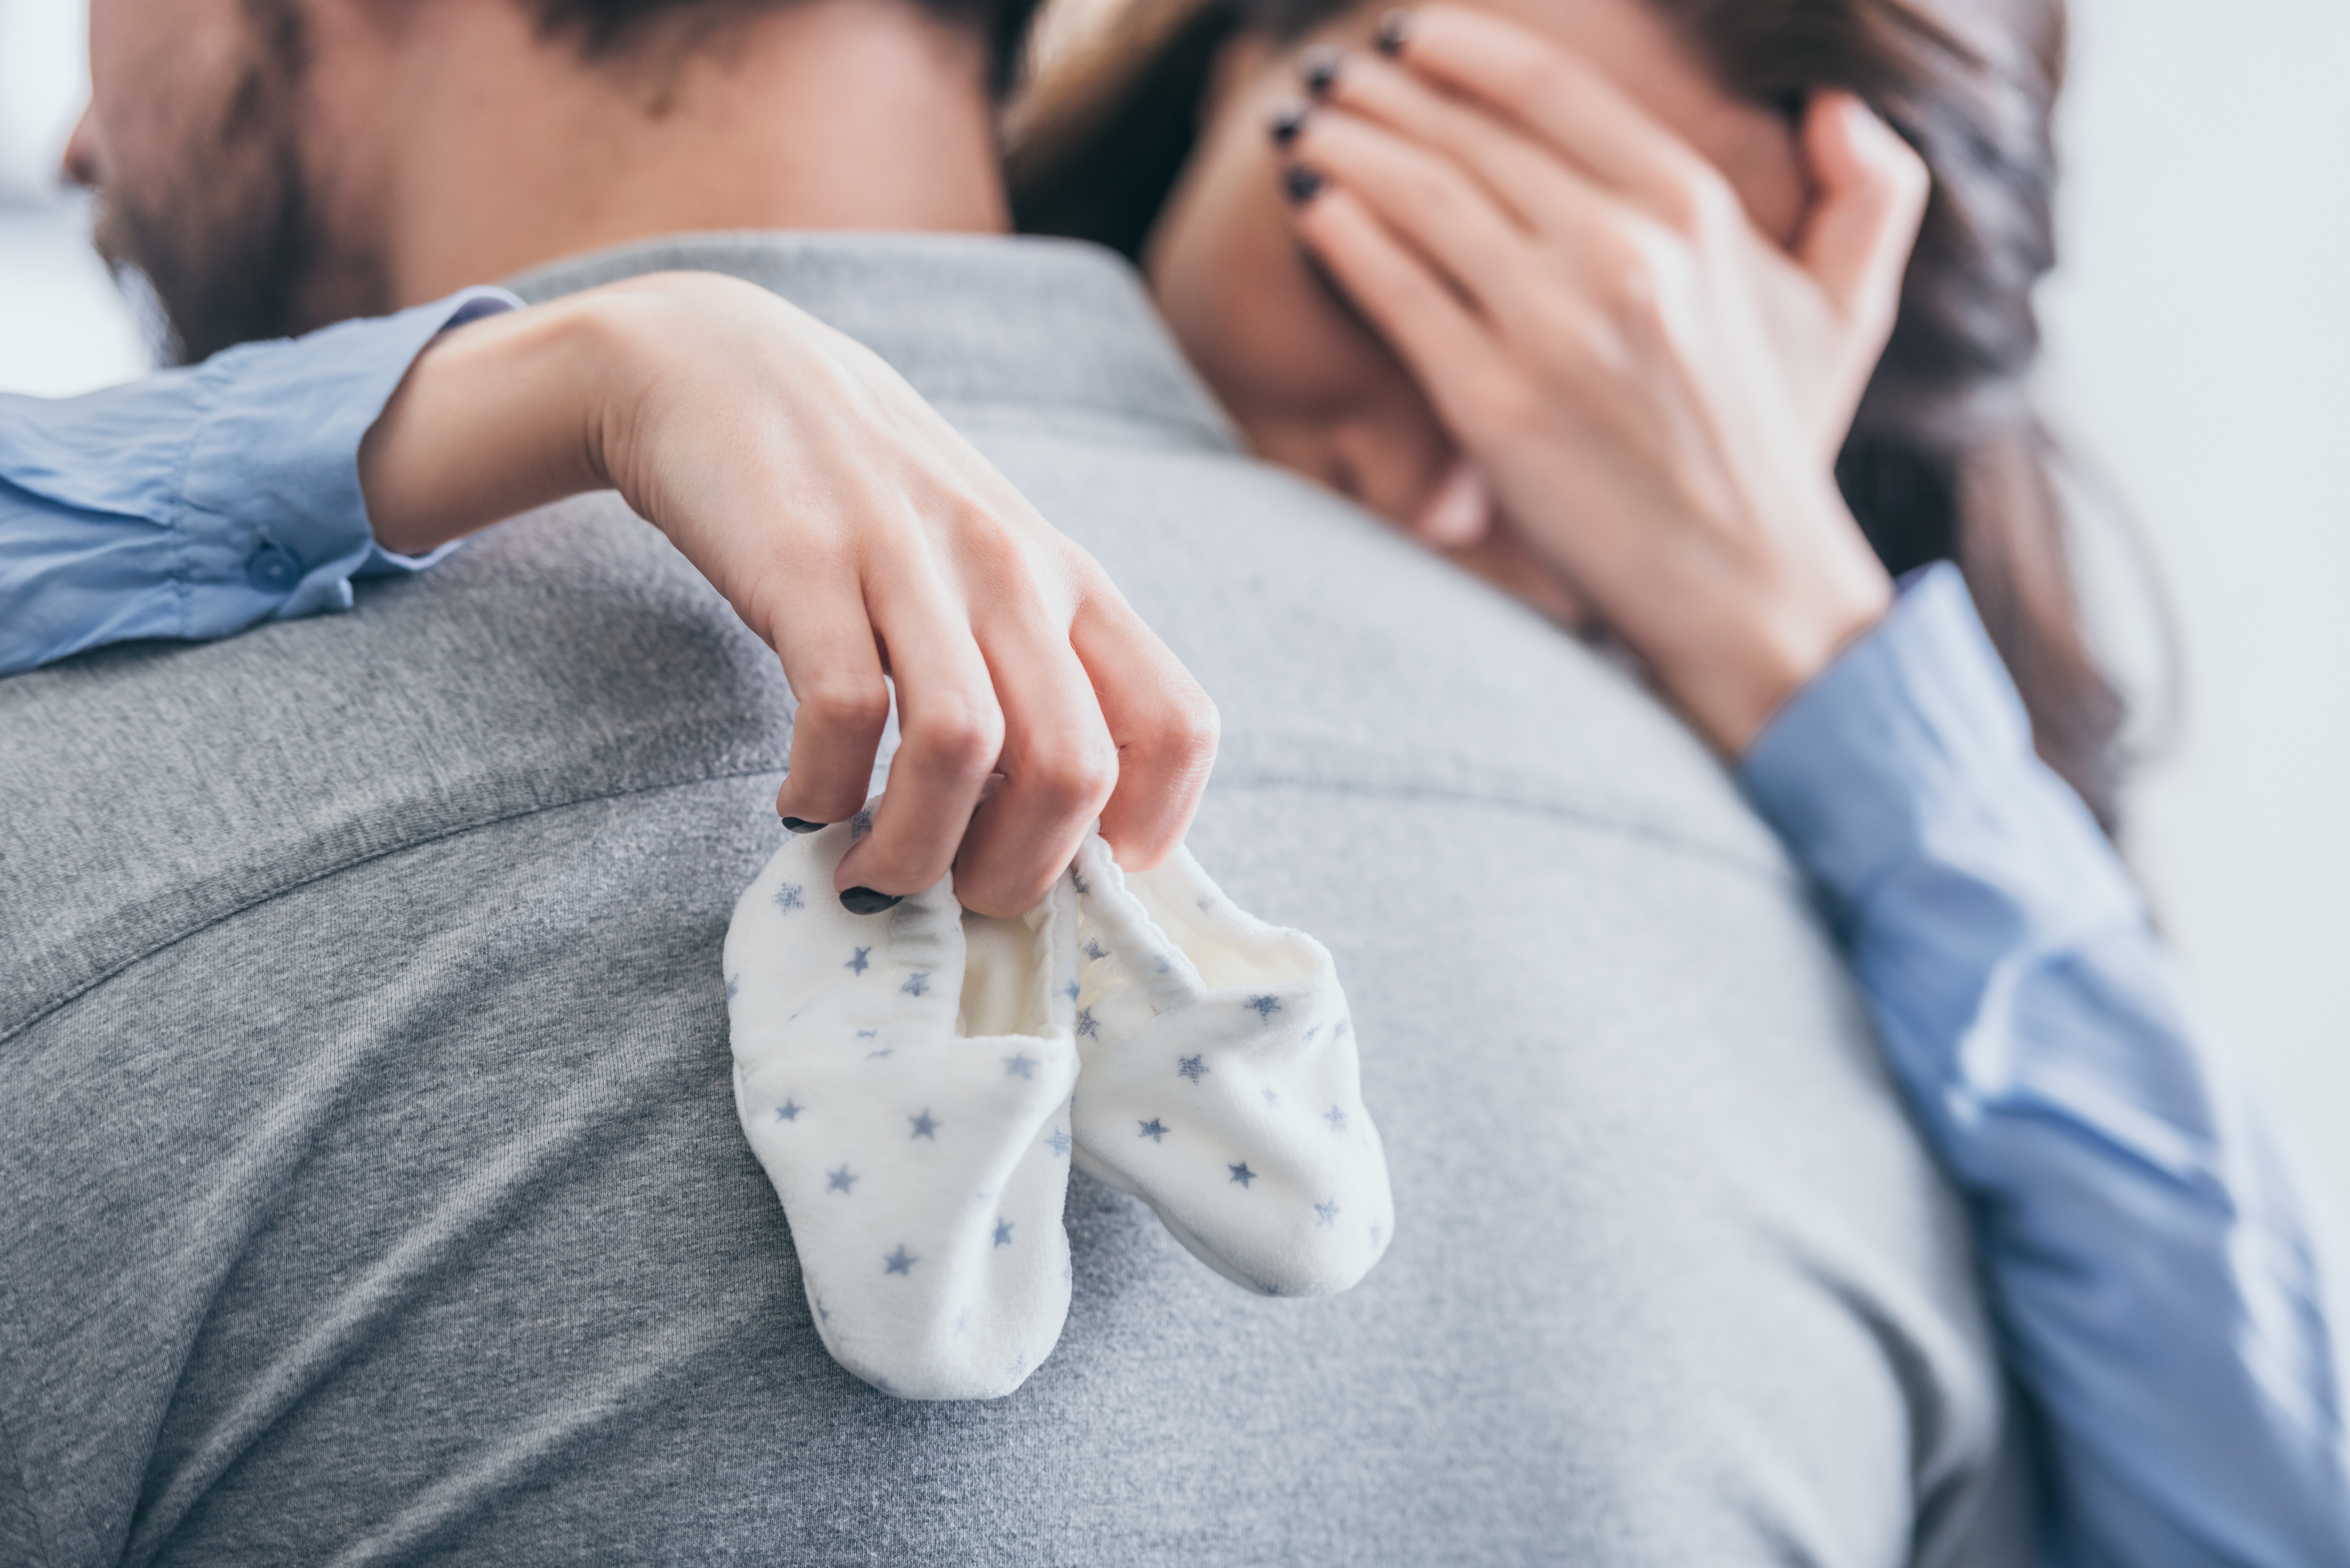 More women choose to have children later in life, and maternal age is the strongest known risk factor for miscarriage. Photo: Shutterstock